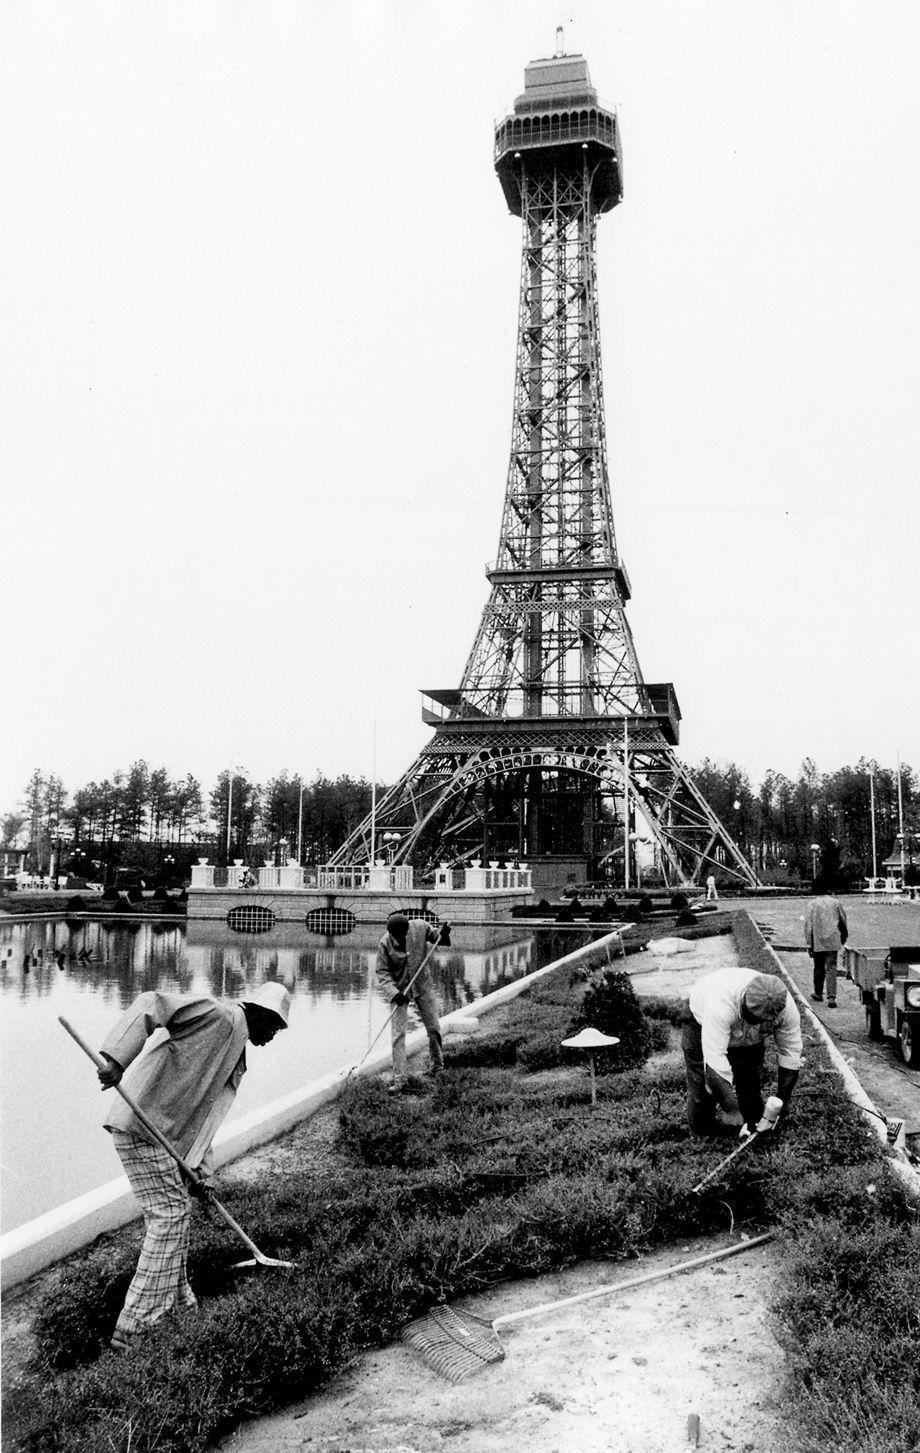 Landscape workers prepared gardens in front of the Eiffel Tower replica at Kings Dominion in Doswell, 1975.